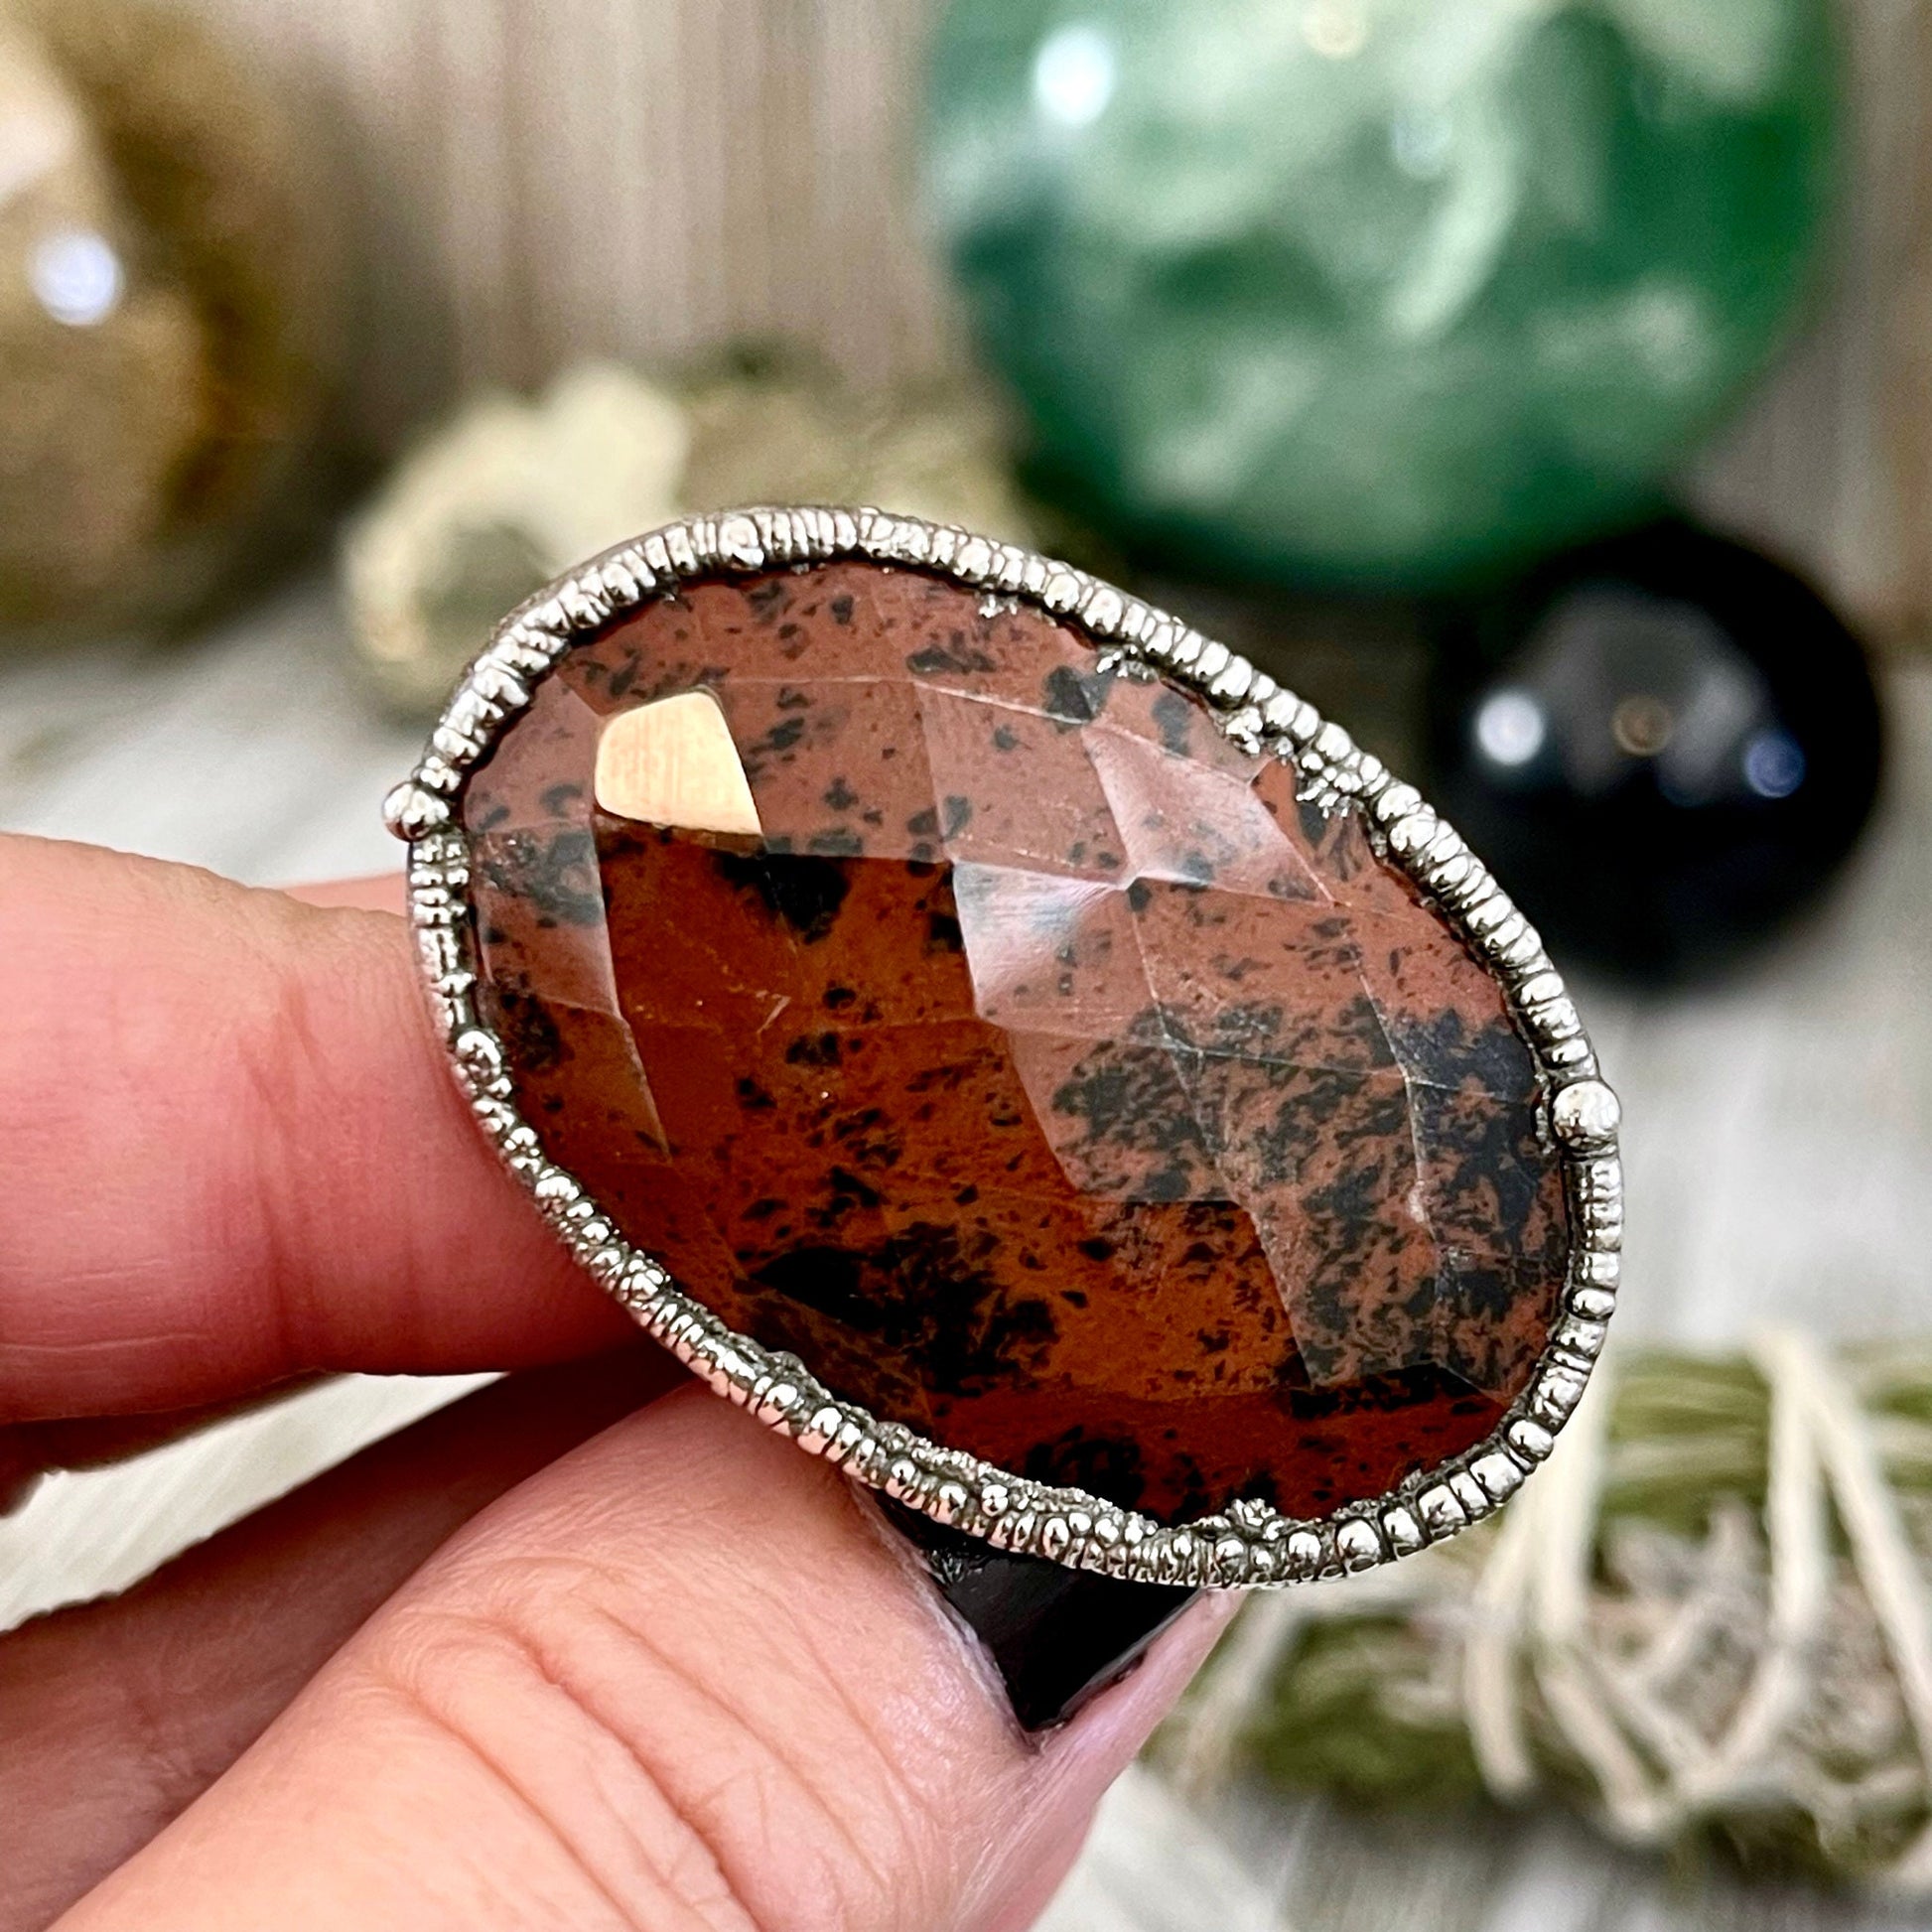 Big Silver Ring, Big Stone Ring, boho jewelry, crystal healing, Electroformed Ring, Etsy ID: 1560765953, FOXLARK- RINGS, gypsy ring, Hippie Ring, Jewelry, Large Crystal Ring, Mahogany Obsidian, Obsidian ring, raw crystal ring, raw quartz crystal, Rings, S